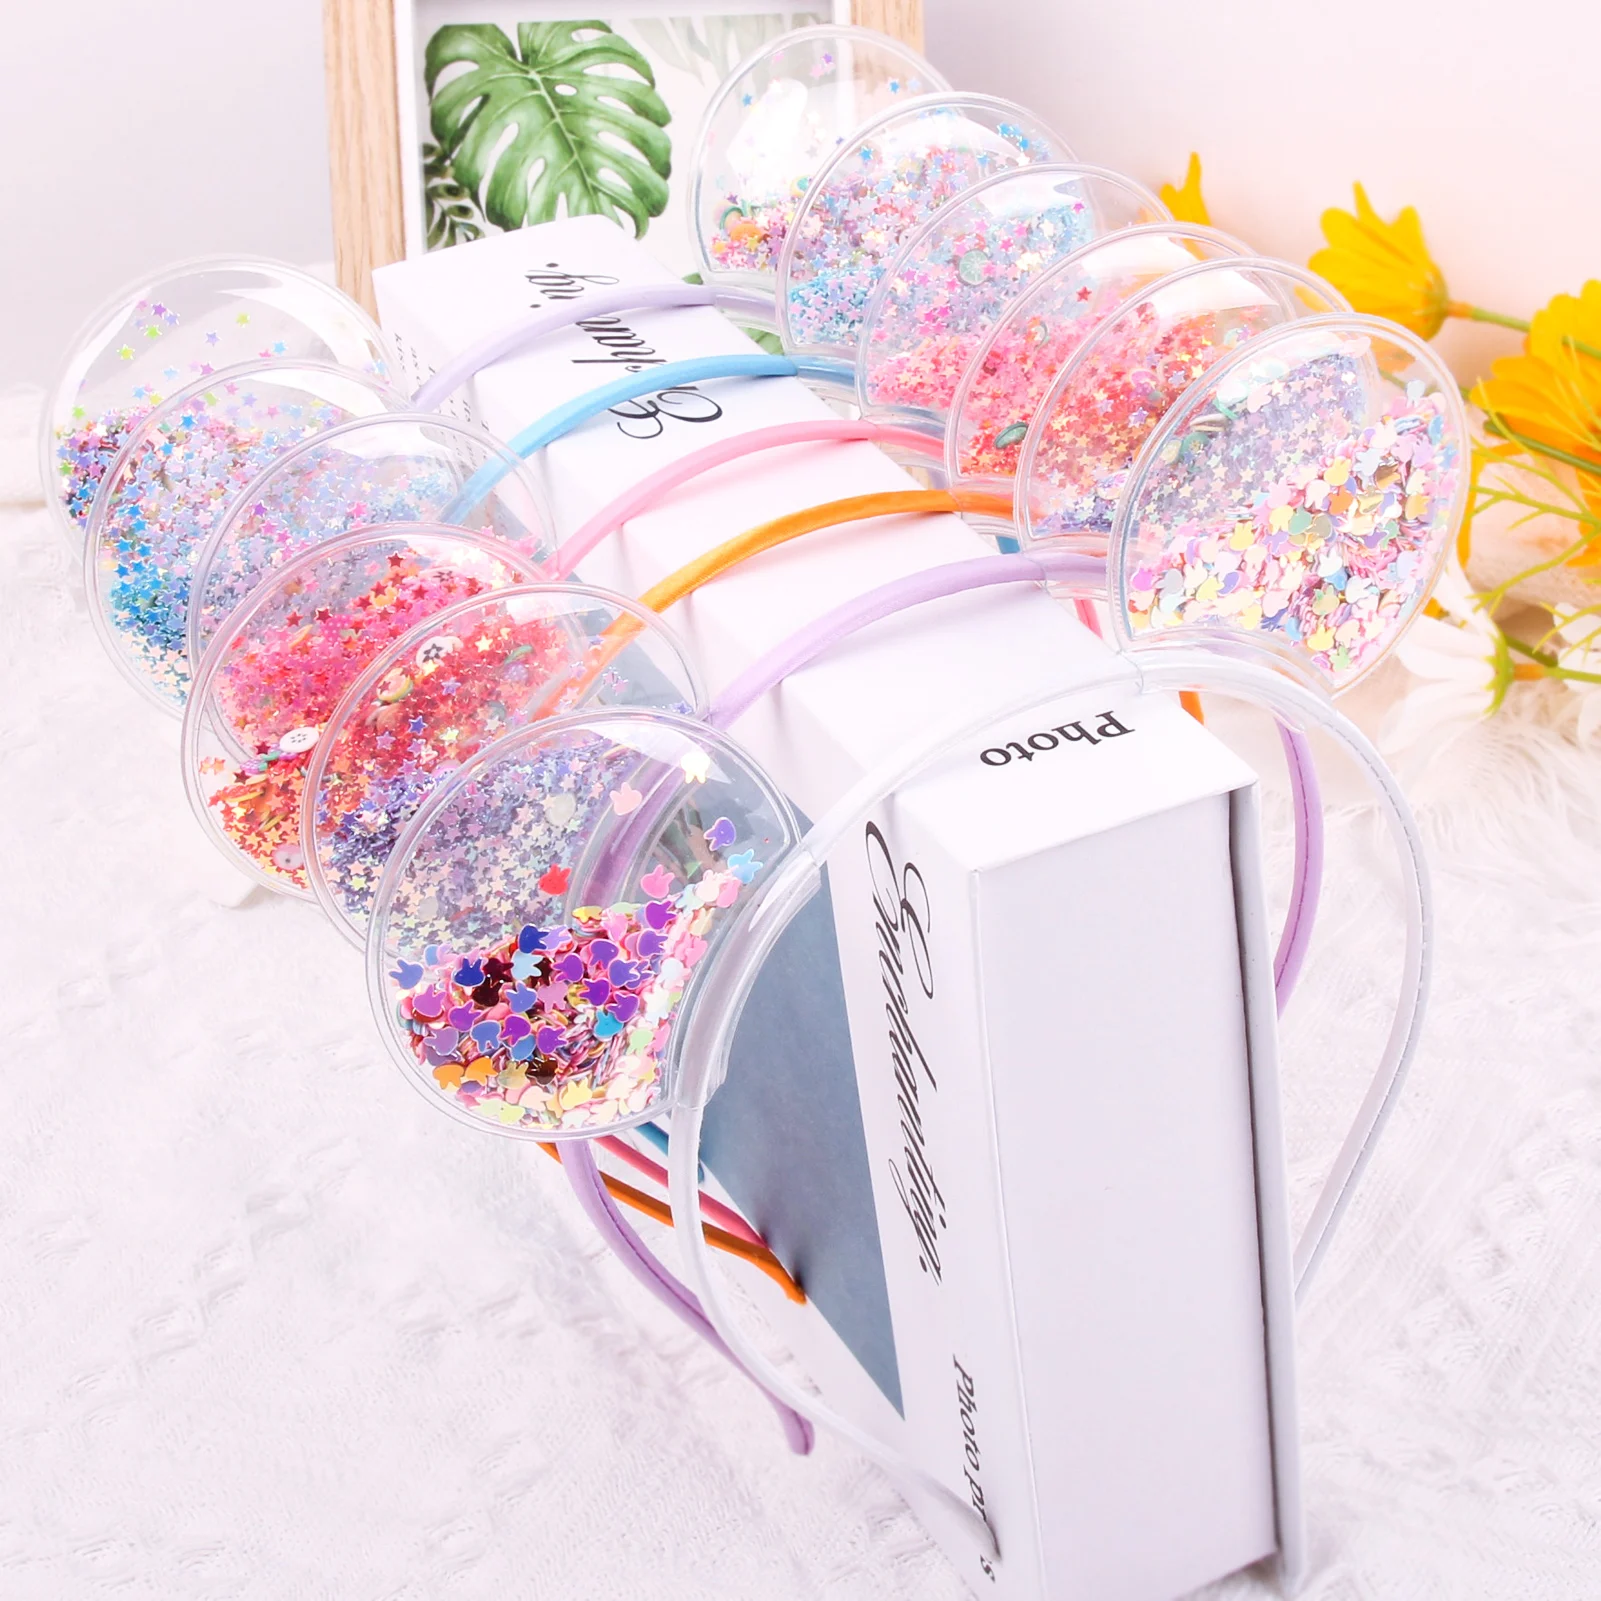 Candygirl Transparent Cat Ears Headband Quicksand Bows Hair Hoop Cute Colorful Sequins Hairbands Girls Princess Hair Accessories candygirl women glitter shiny sequins headband cute colors shine hairbands for girls family party headwear hair accessories